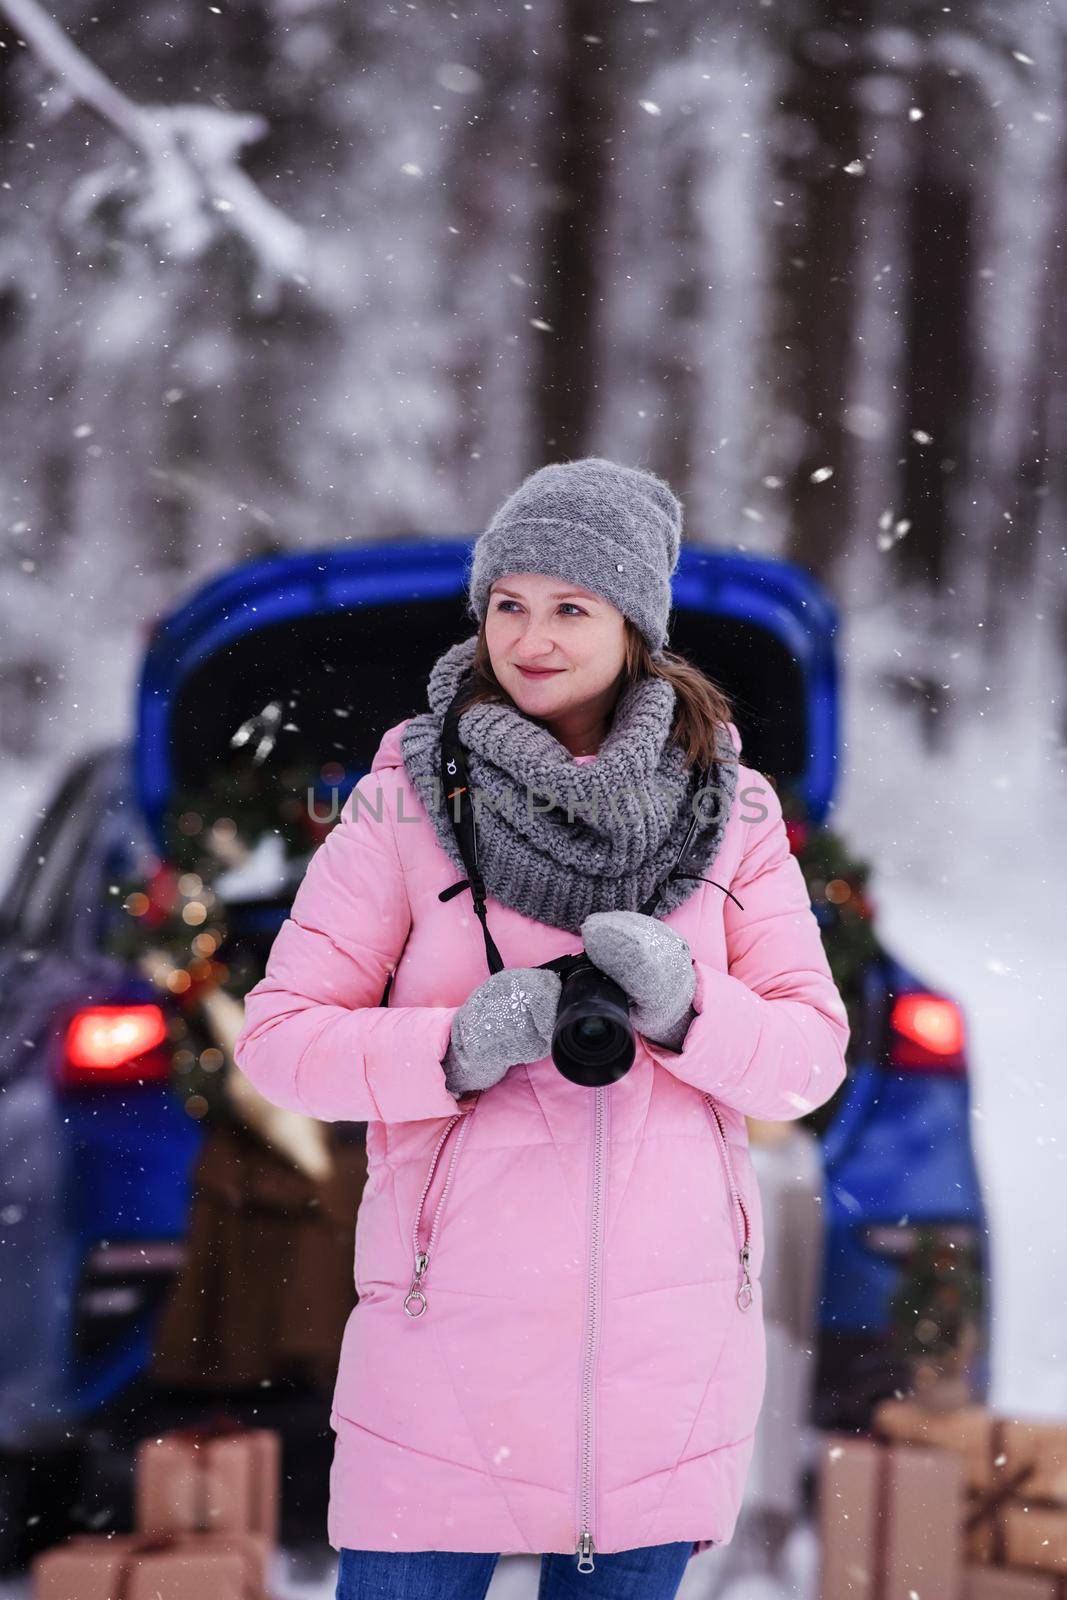 A woman in a winter snow-covered forest in the trunk of a car decorated with Christmas decor. A female photographer holds a camera in her hands.